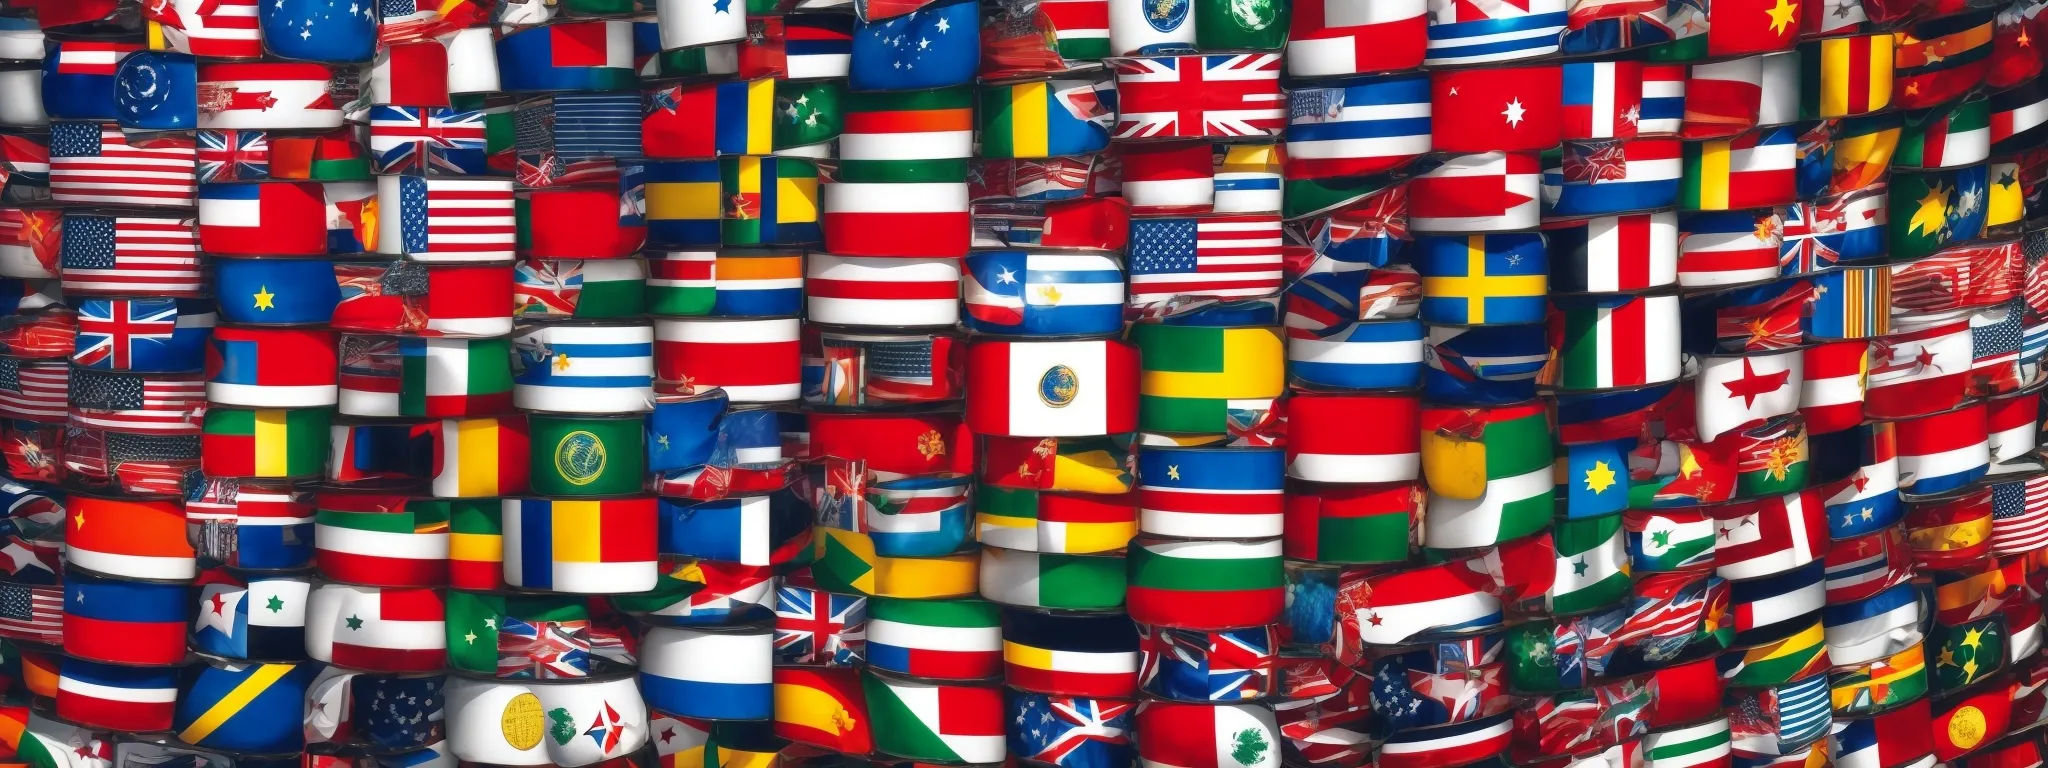 a globe surrounded by diverse flag icons with interconnected lines symbolizing a multilingual internet network.